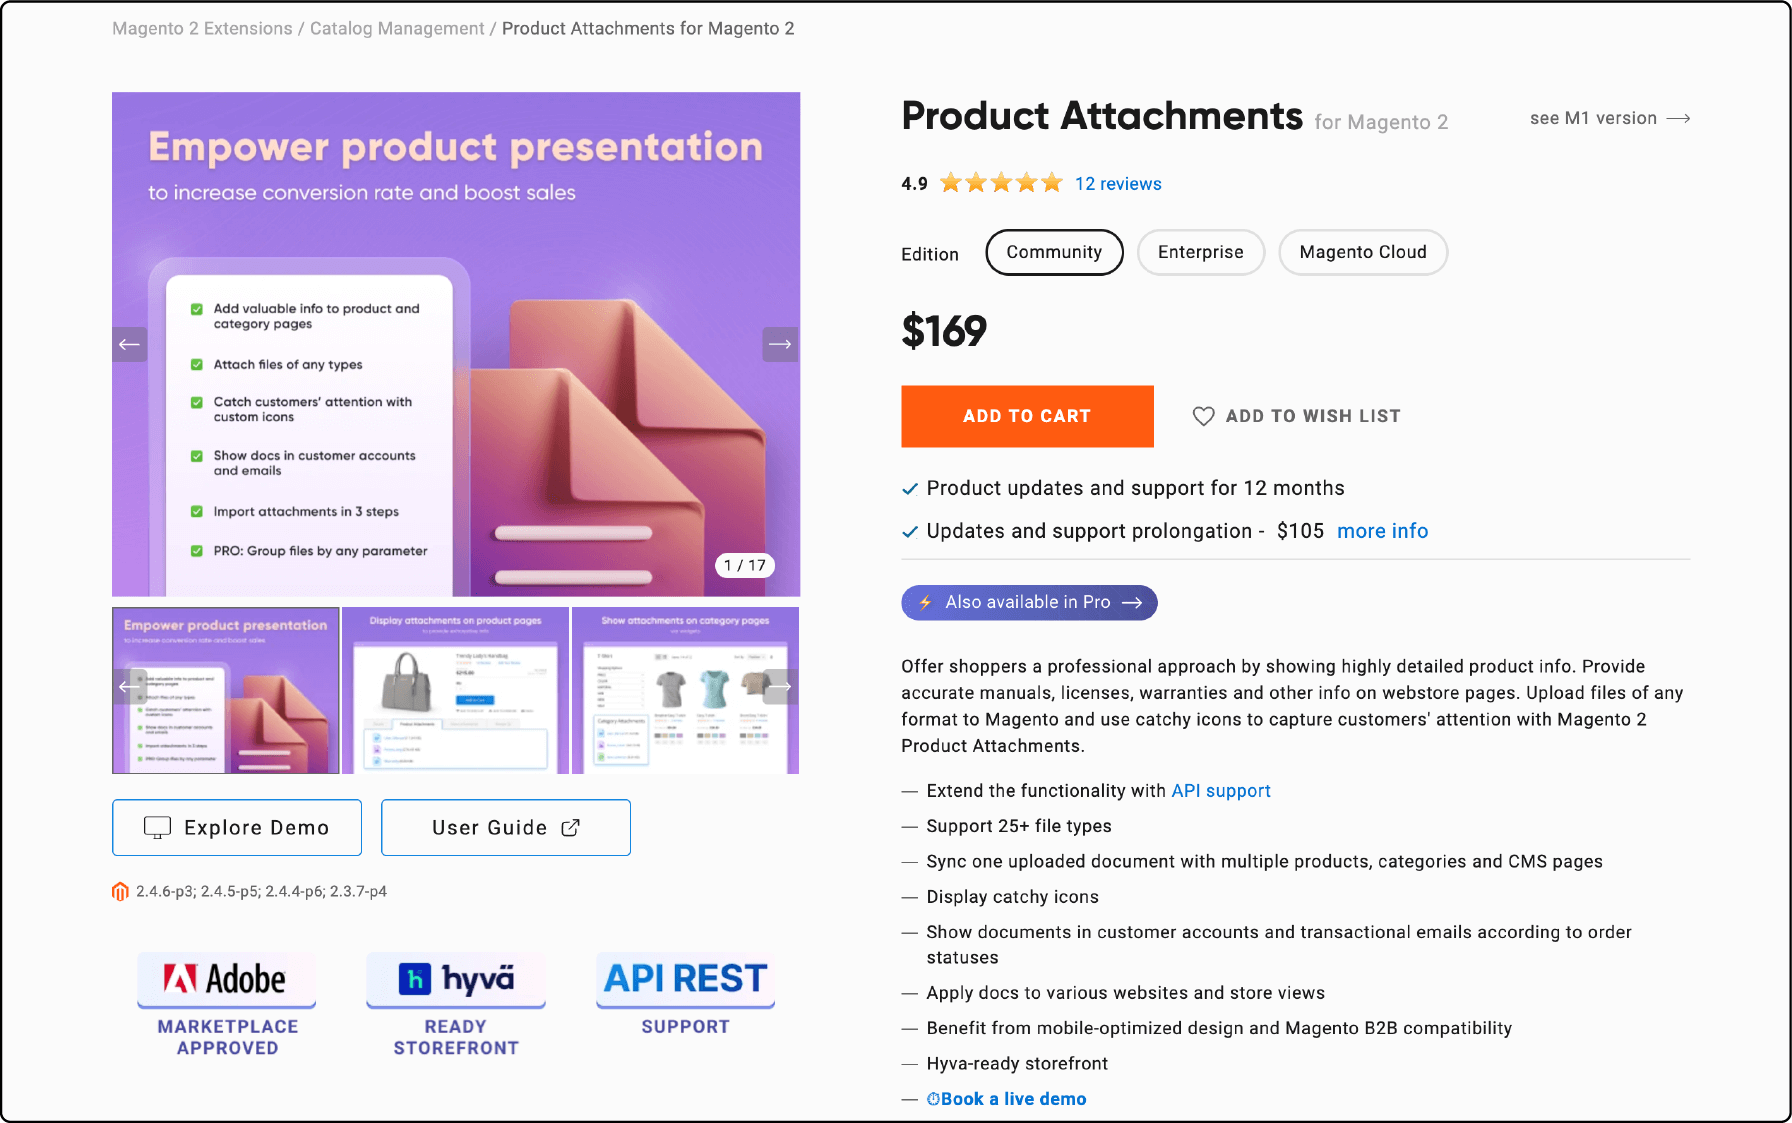 Amasty's Product Attachments for Magento 2 Screenshot